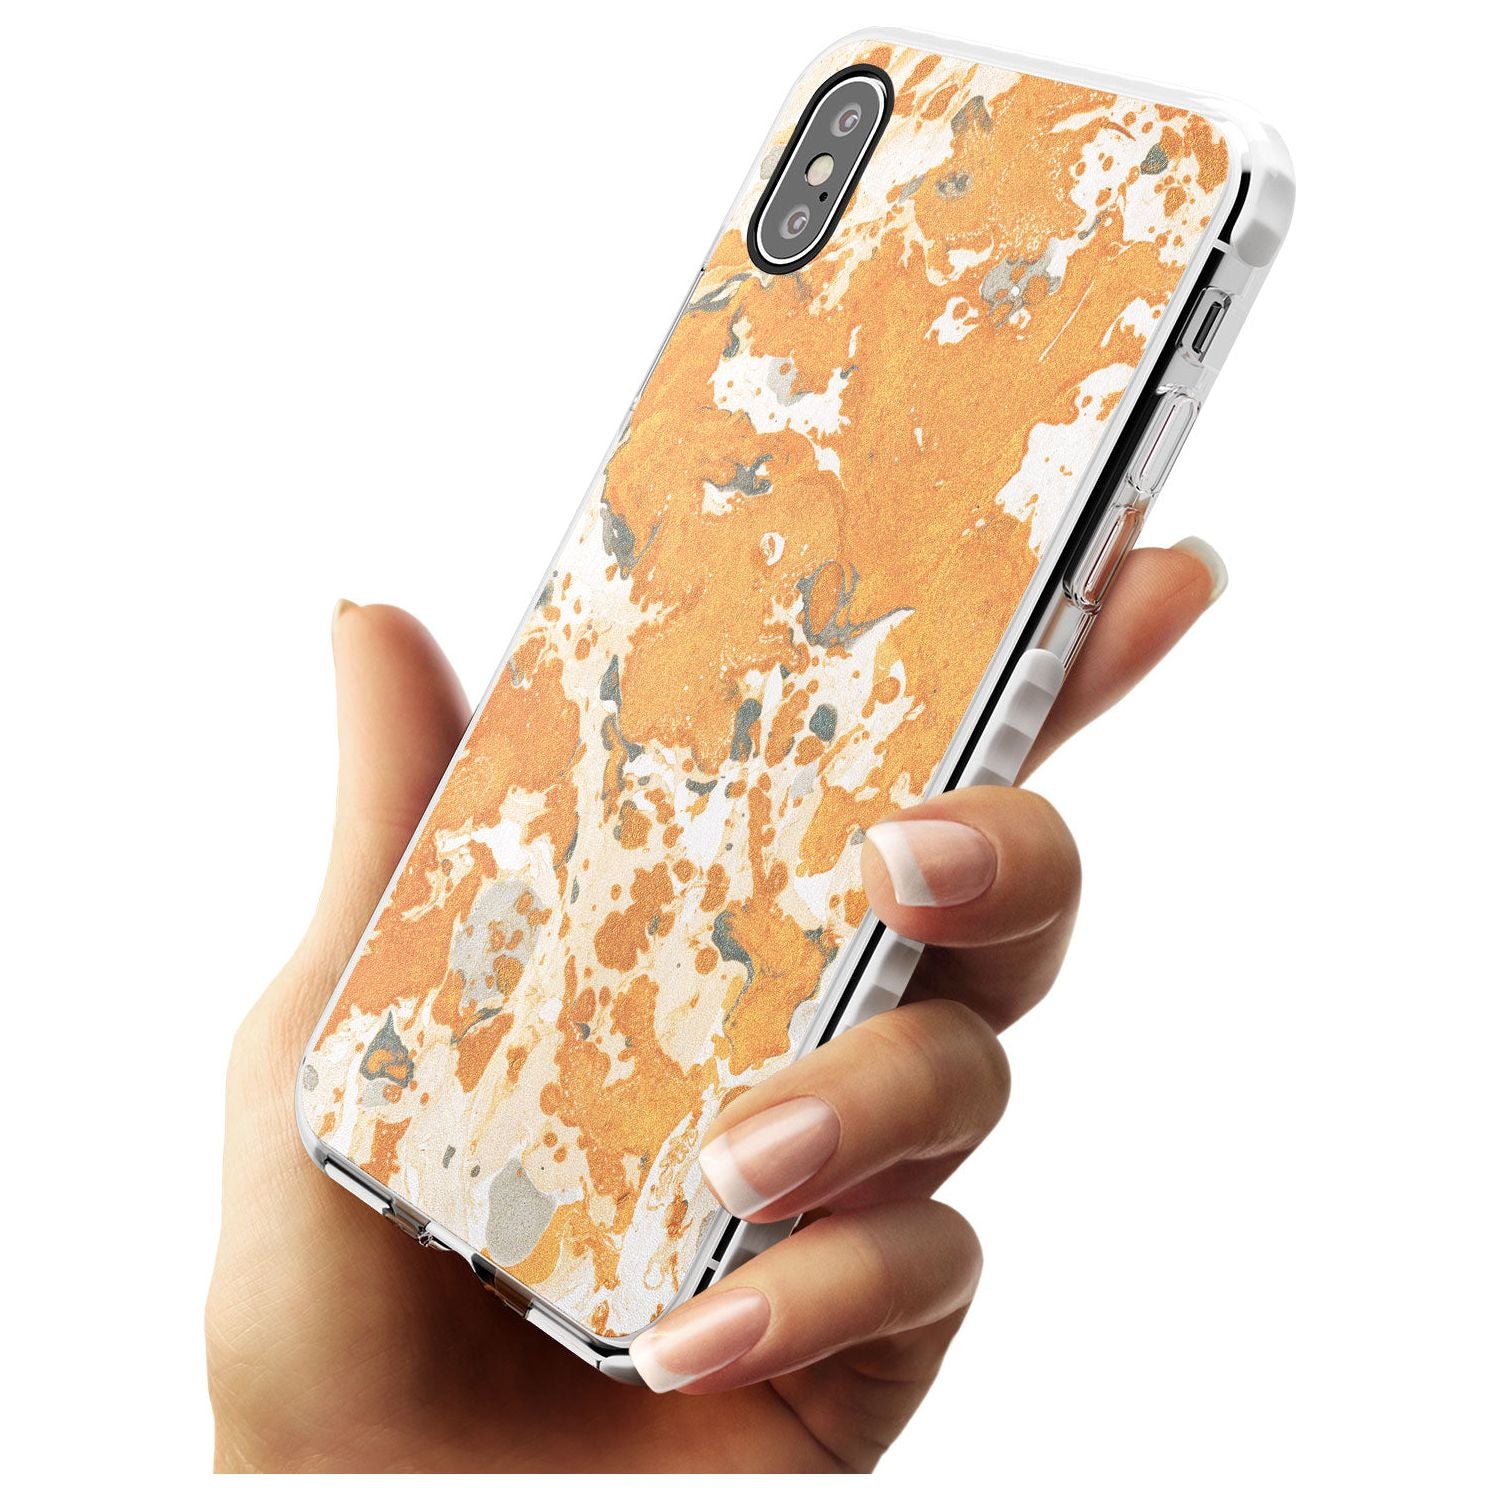 Orange Marbled Paper Pattern Impact Phone Case for iPhone X XS Max XR